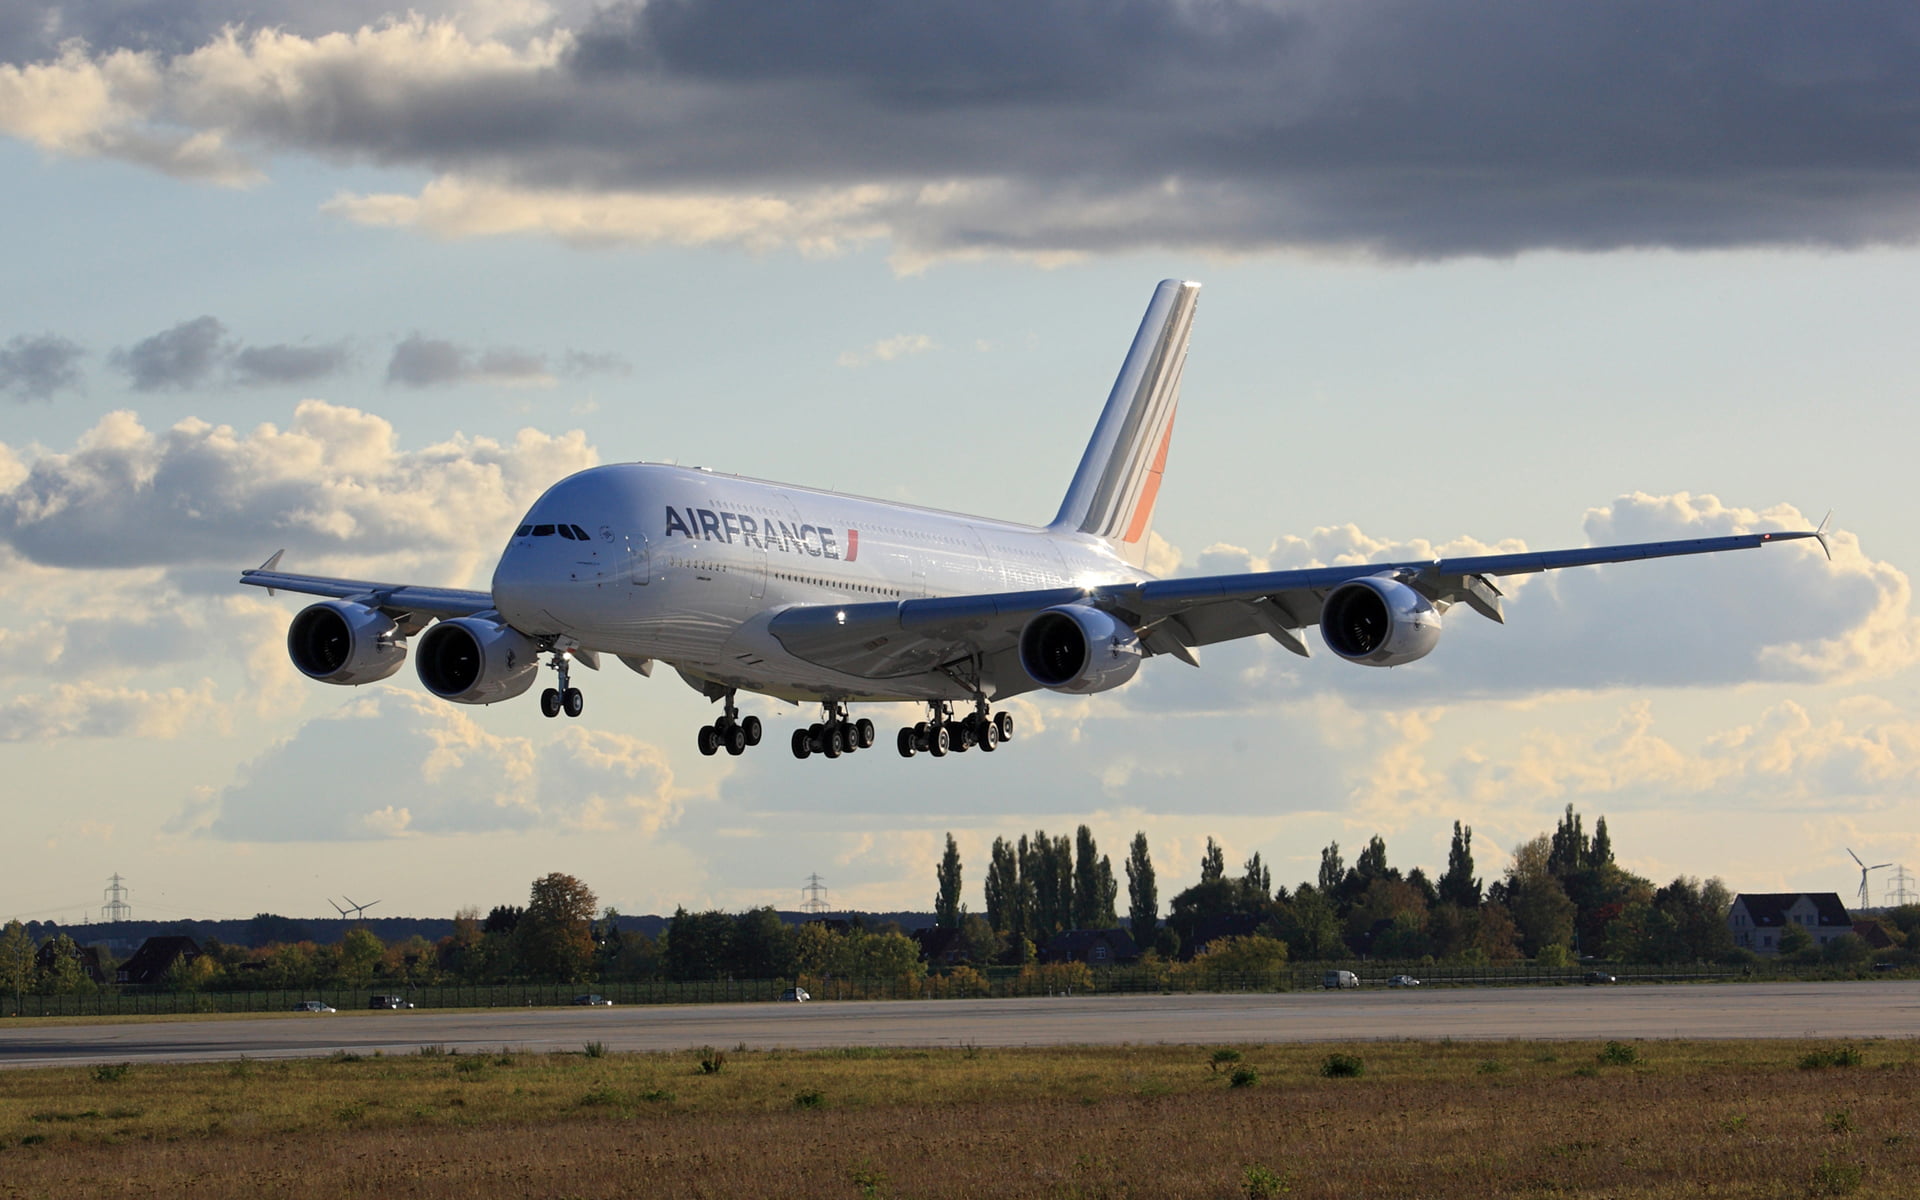 white AirFrance airliners, A380, Airbus, Aviatoin, Landing, airplane